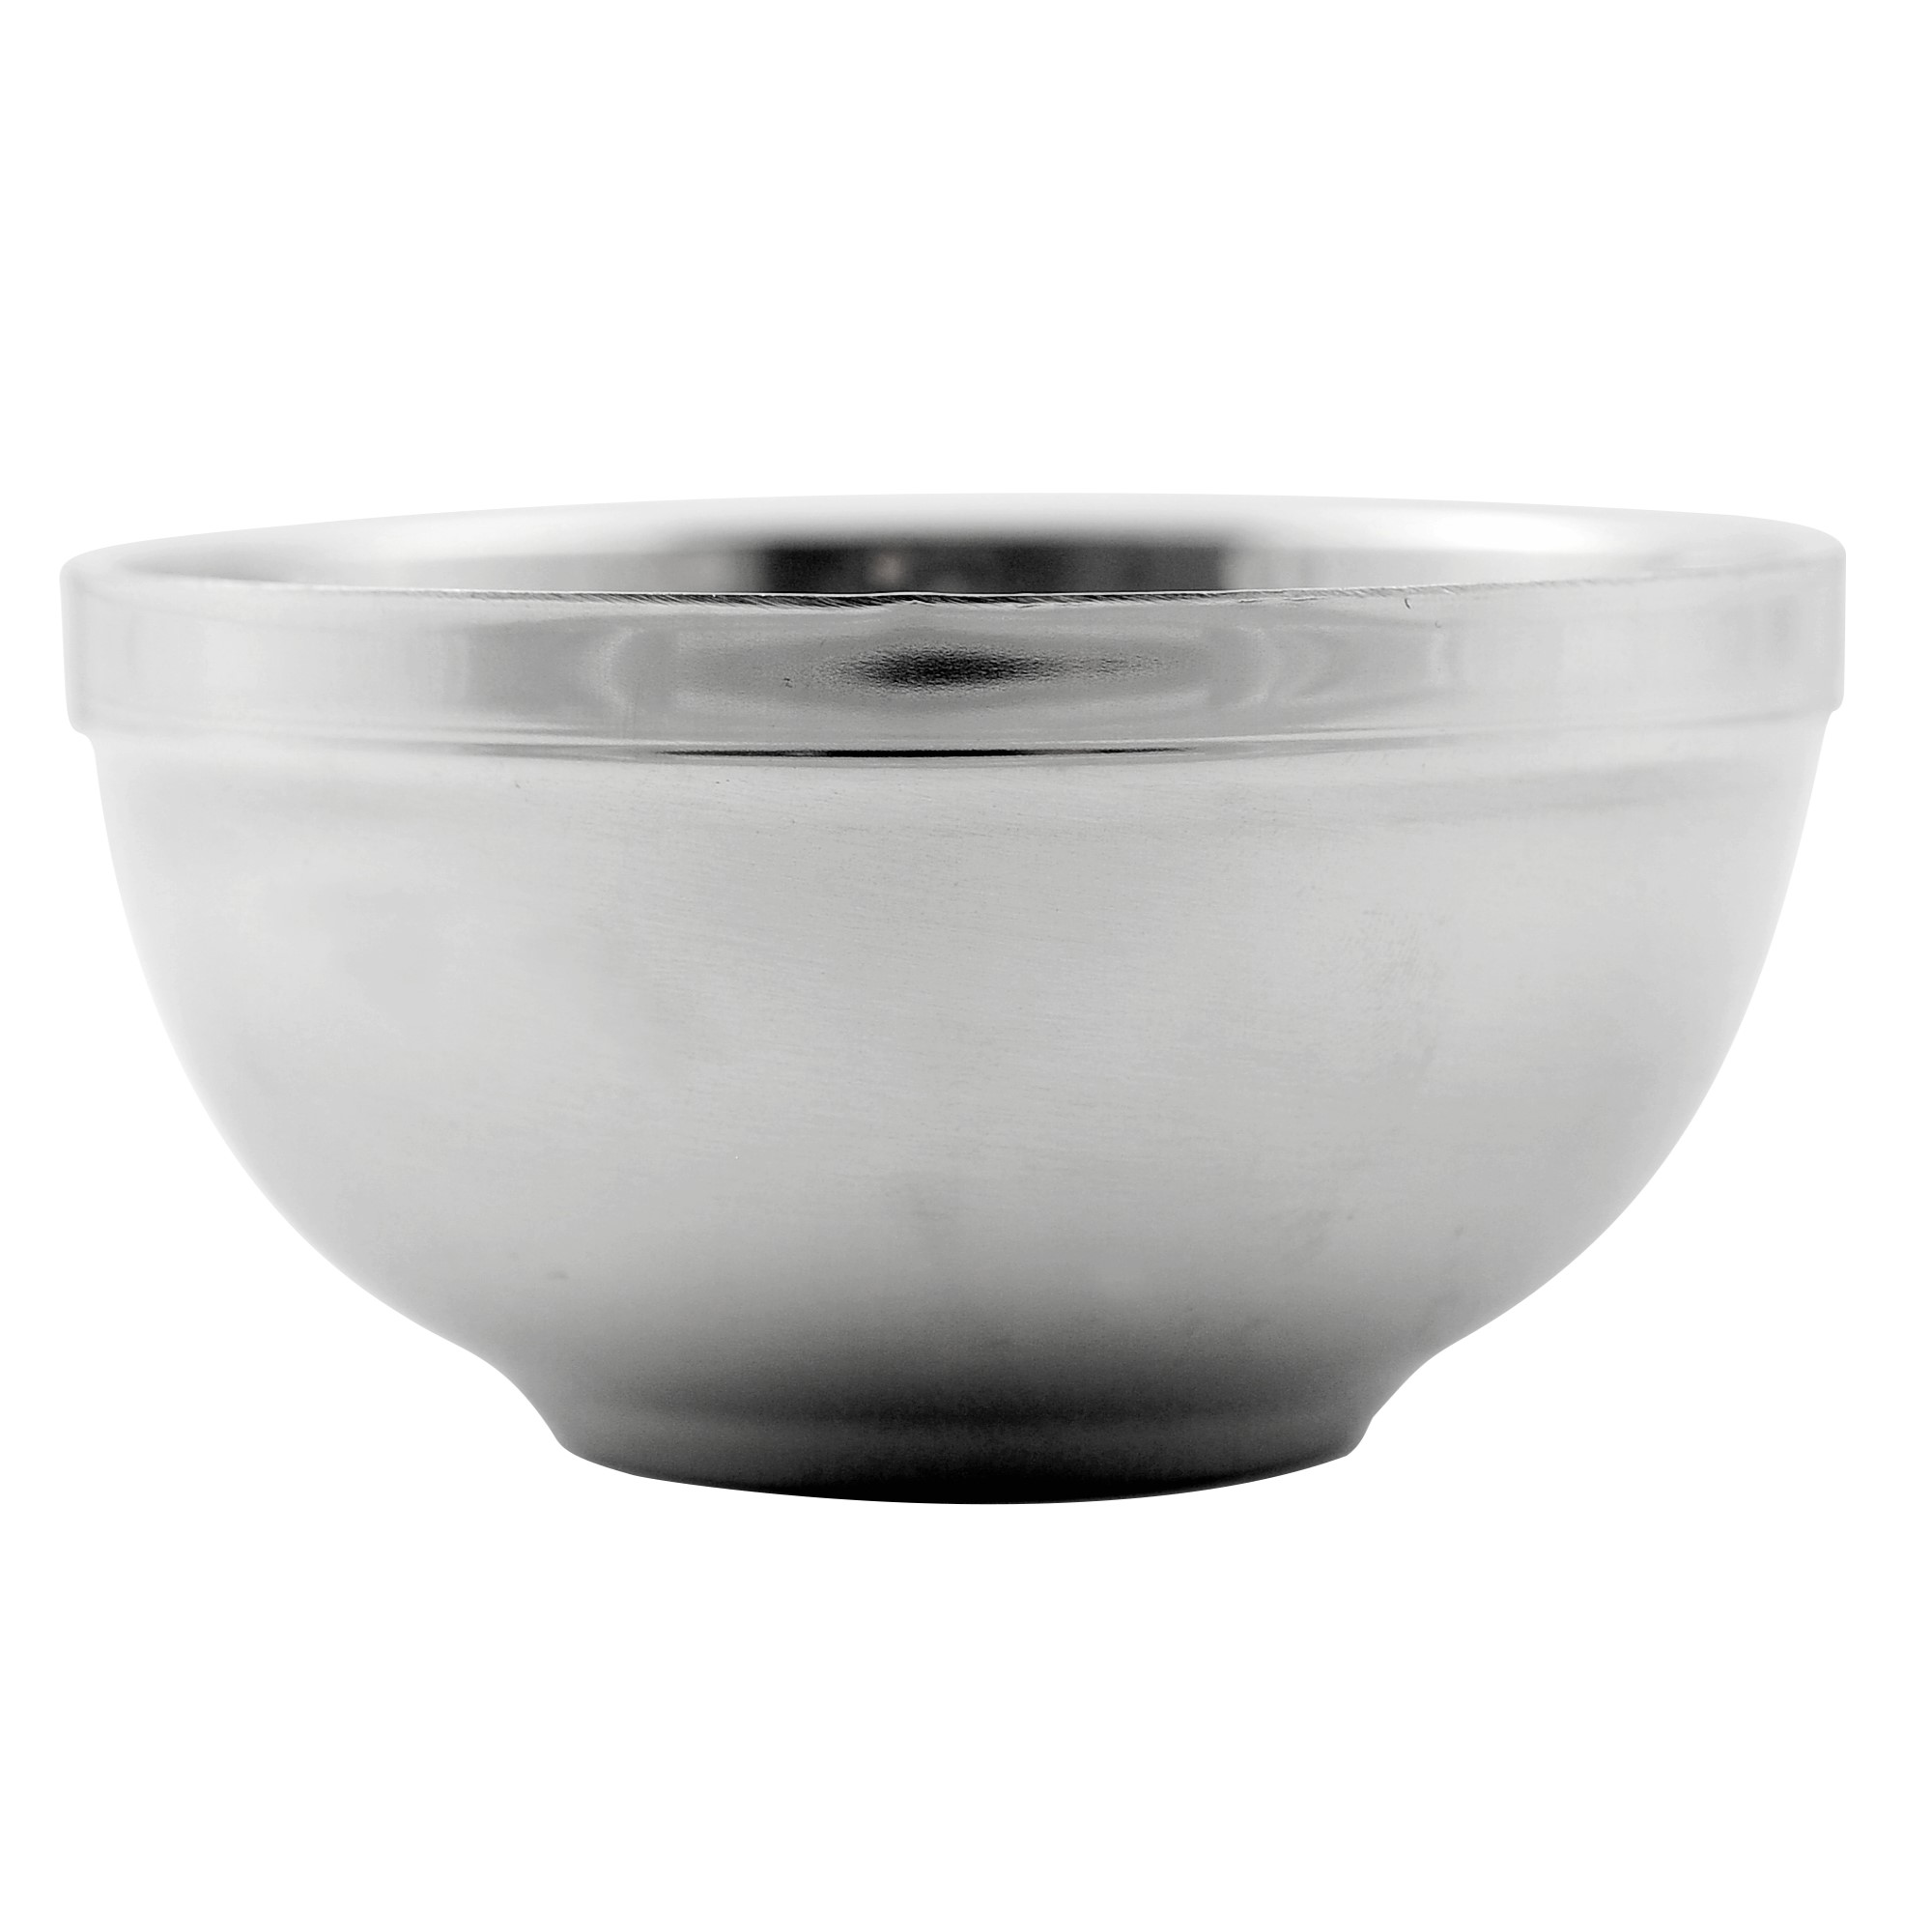 Double-layer insulation bowl 16CM, , large